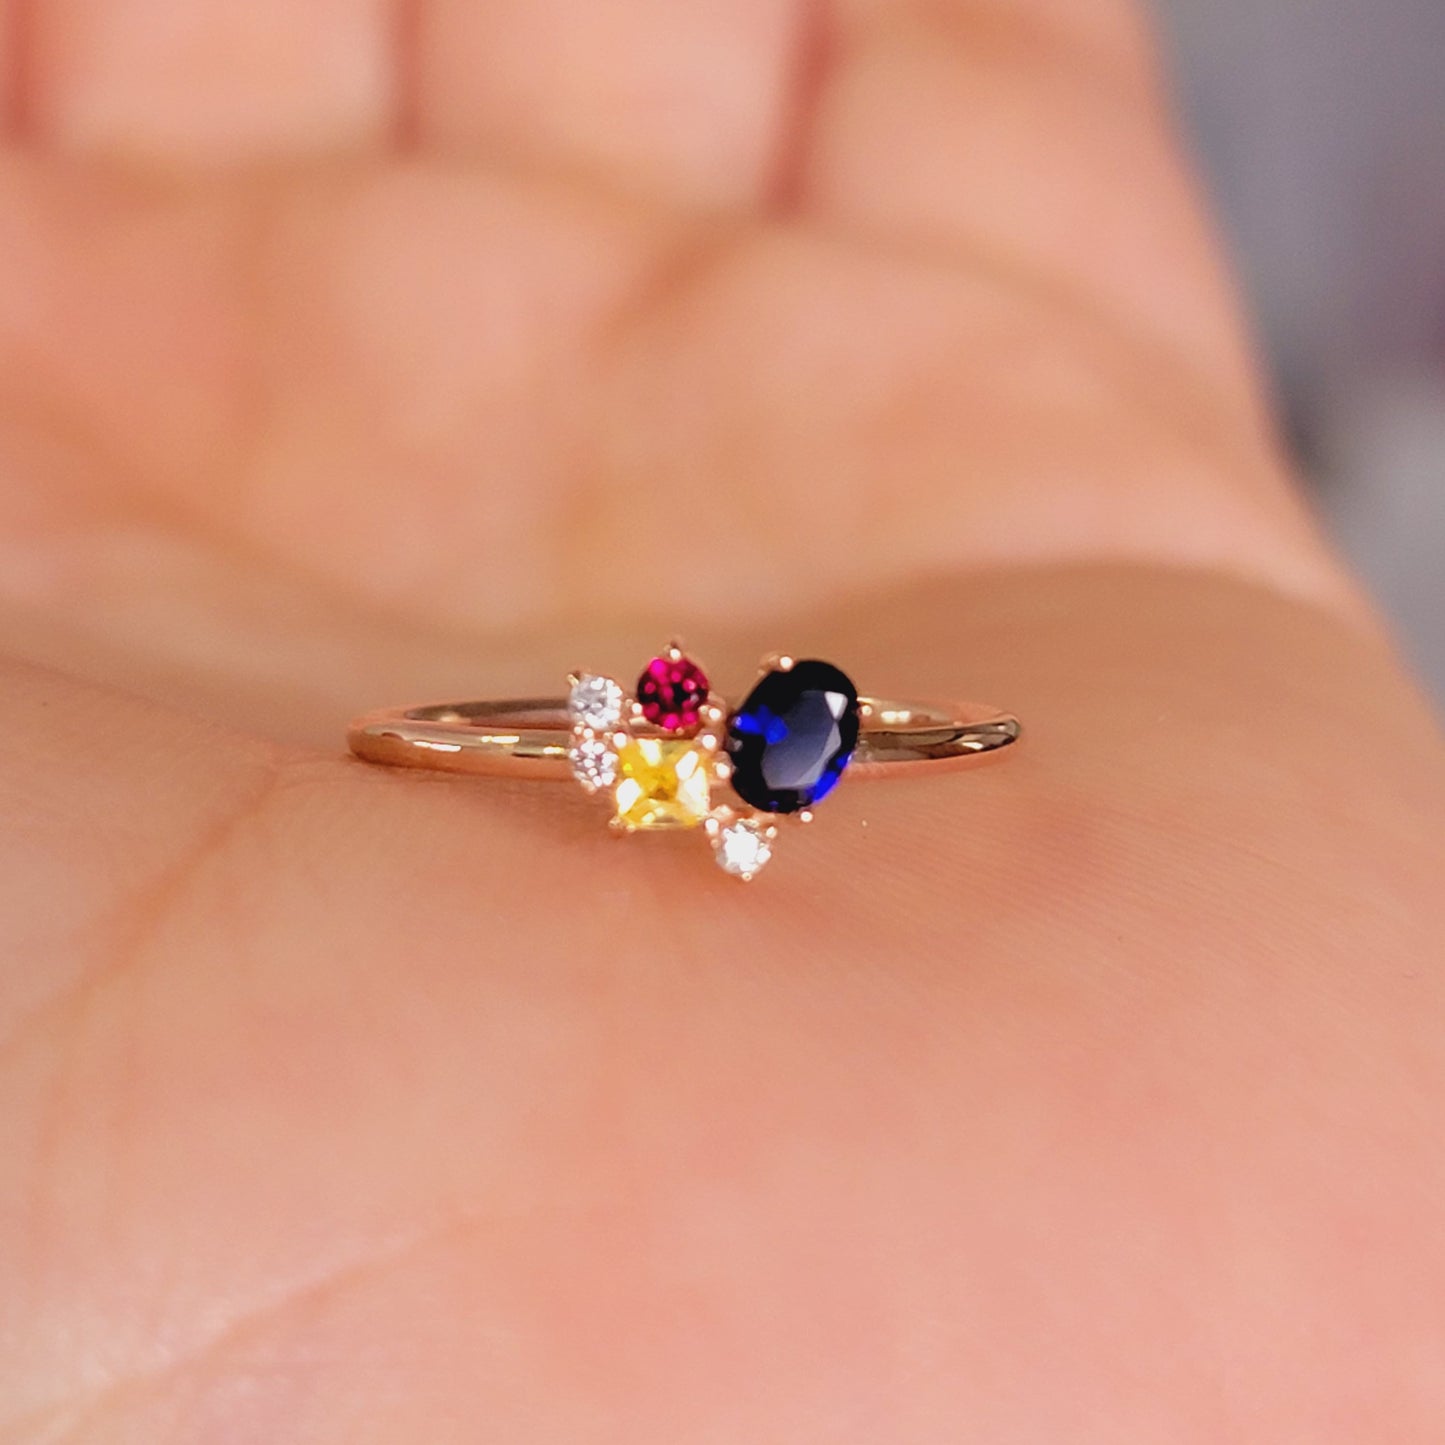 14k Gold Cluster Diamond and Gemstone Ring